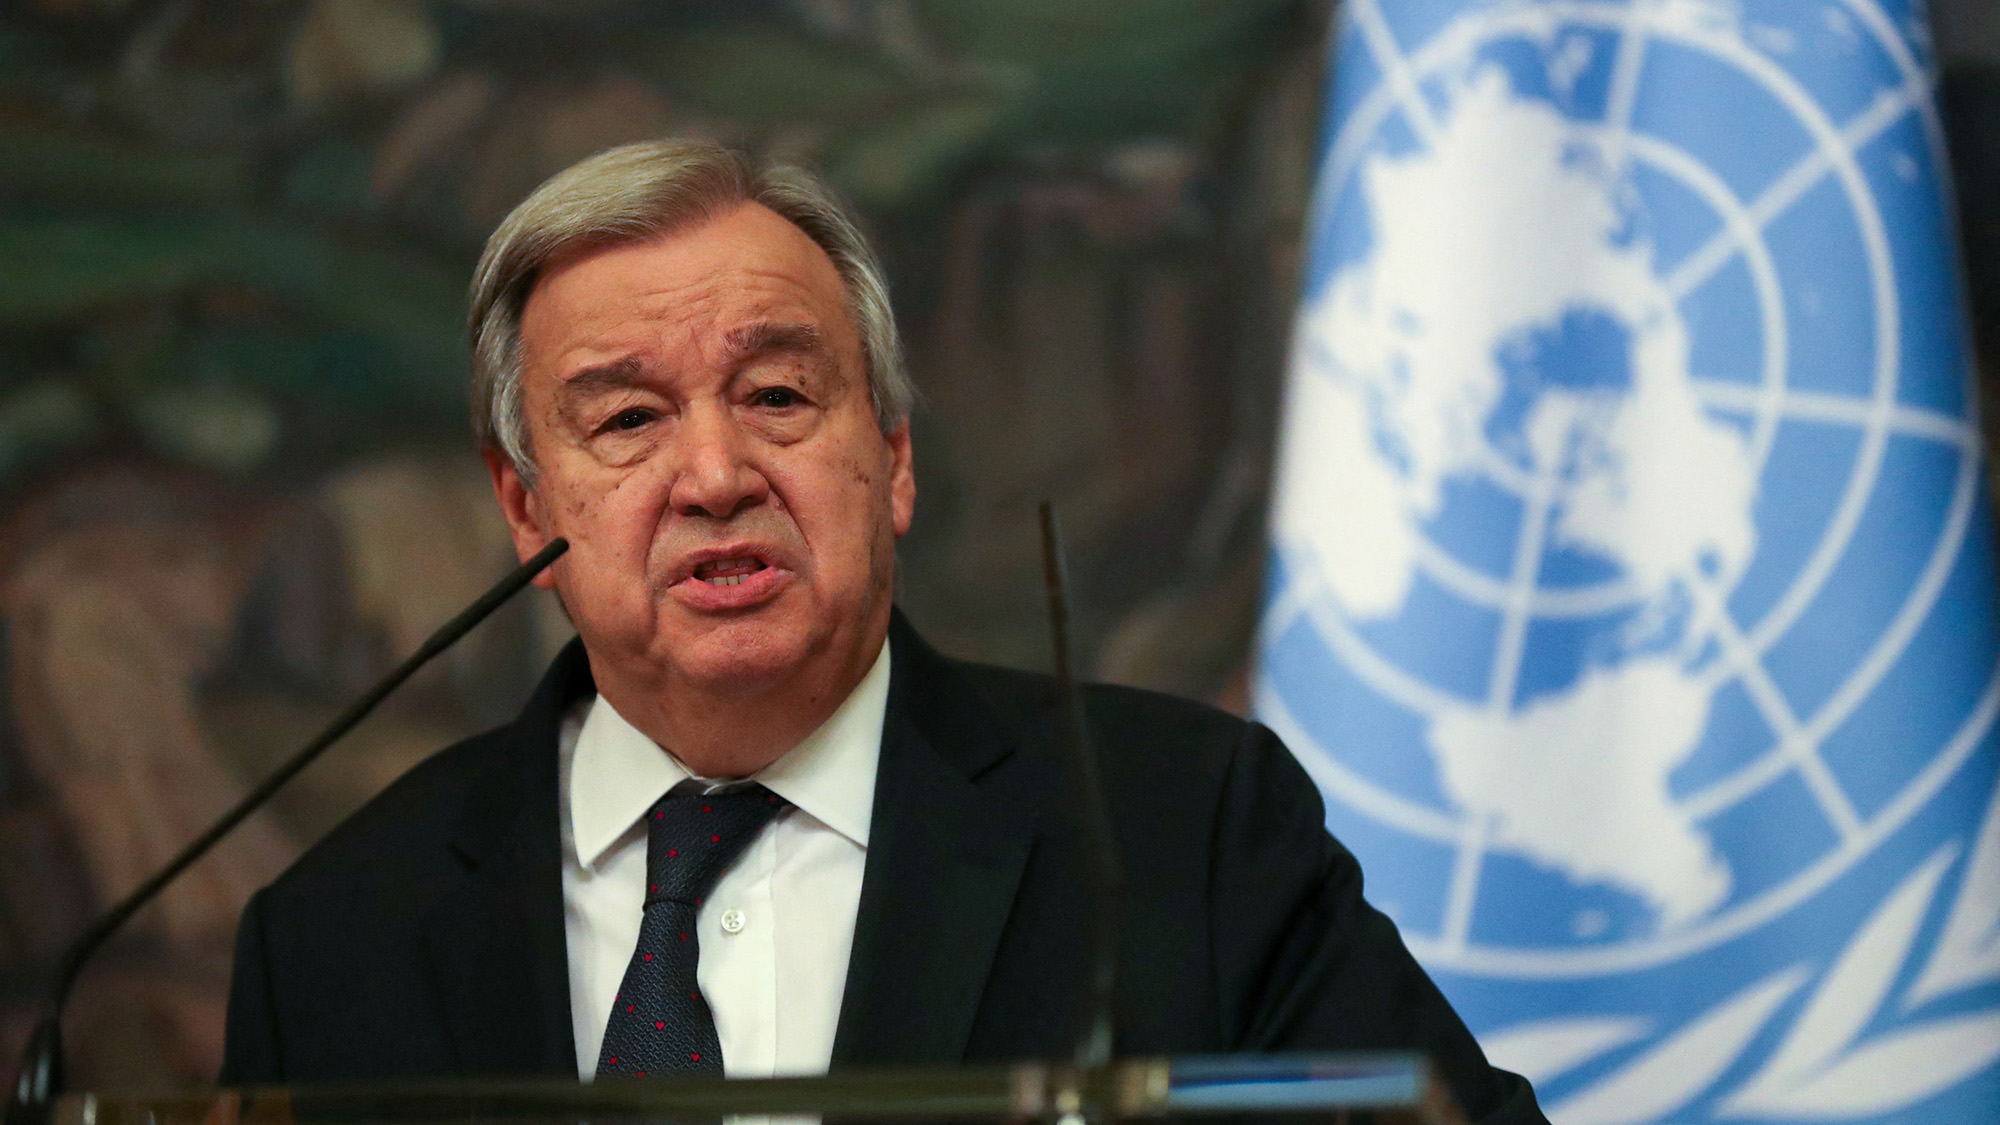 United Nations Secretary-General António Guterres speaks during a press conference in Moscow on April 26.